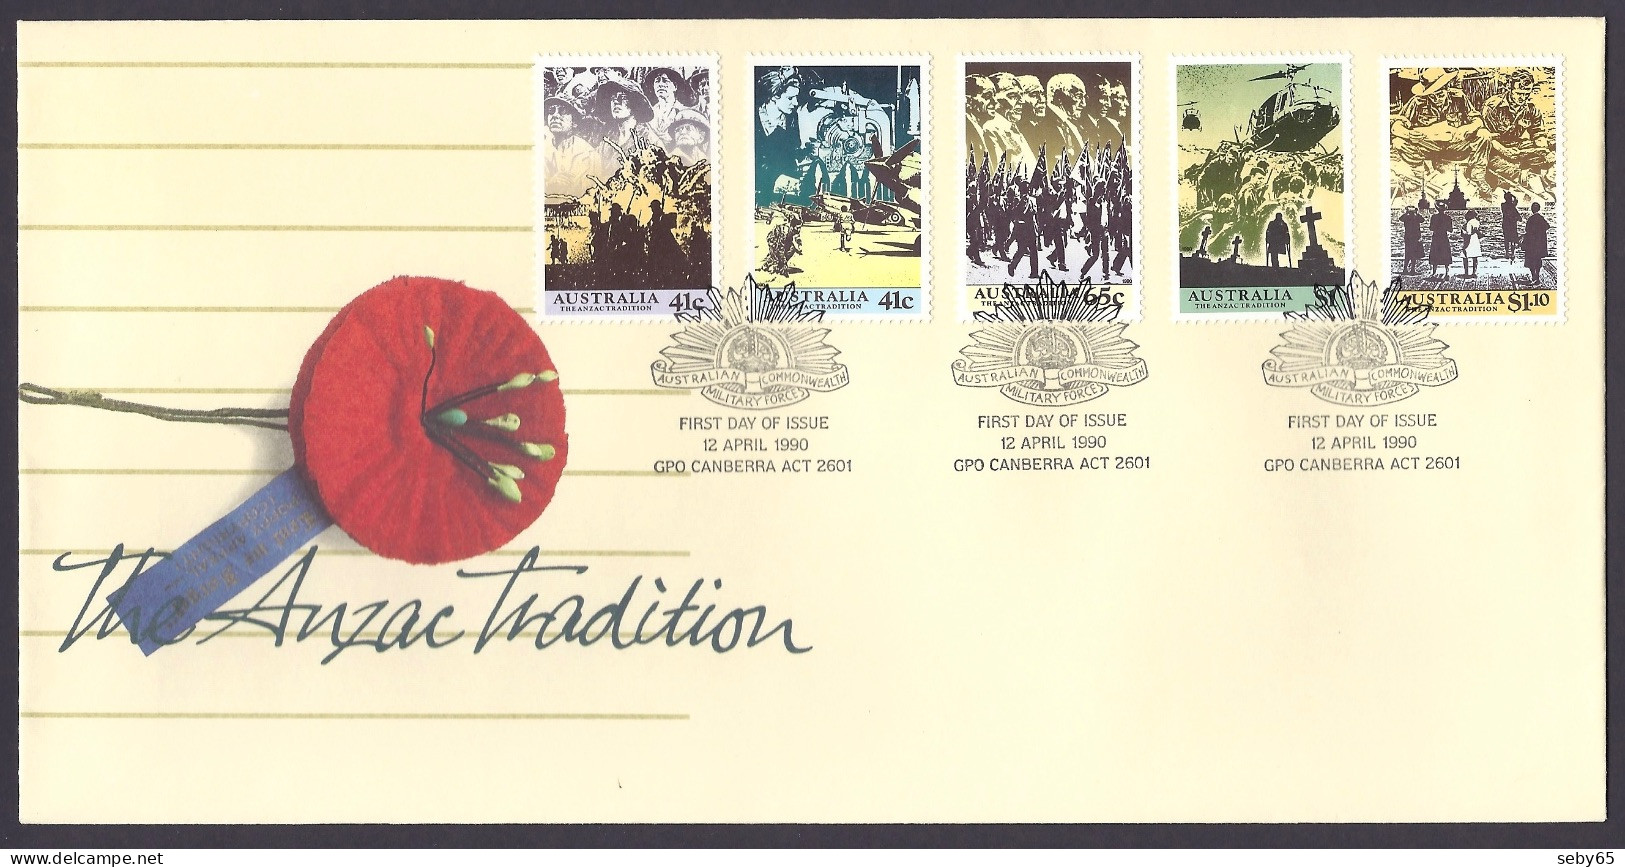 Australia 1990 - The Anzac Tradition, War, Troops, Landing, Army, Military - FDC - Premiers Jours (FDC)